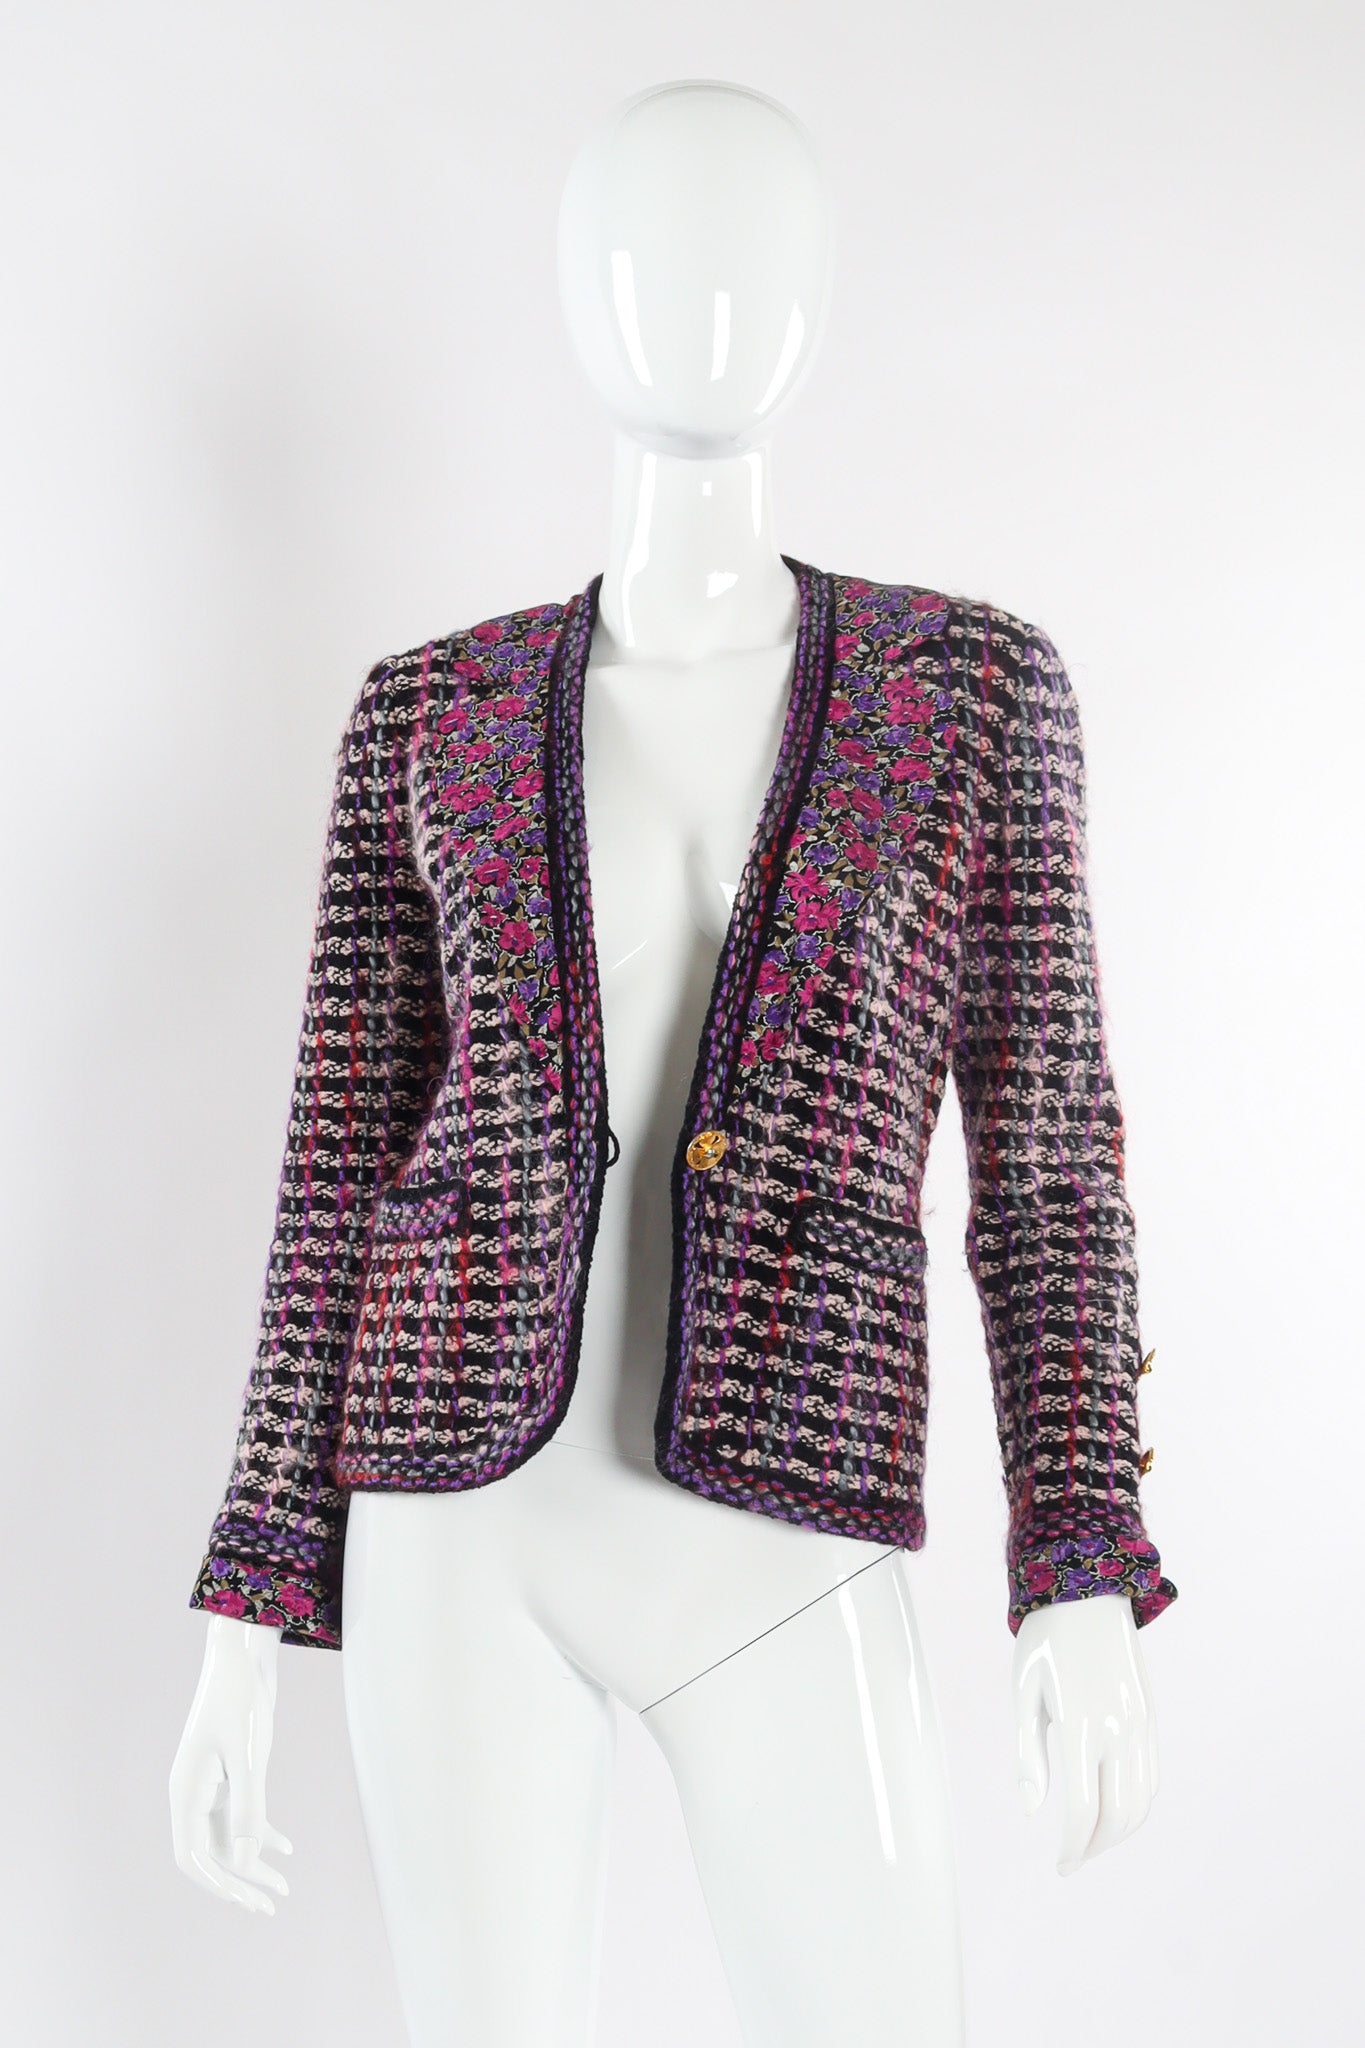 Vintage Adolfo Wool Jacket with Floral Accents Unbuttoned View @recessla